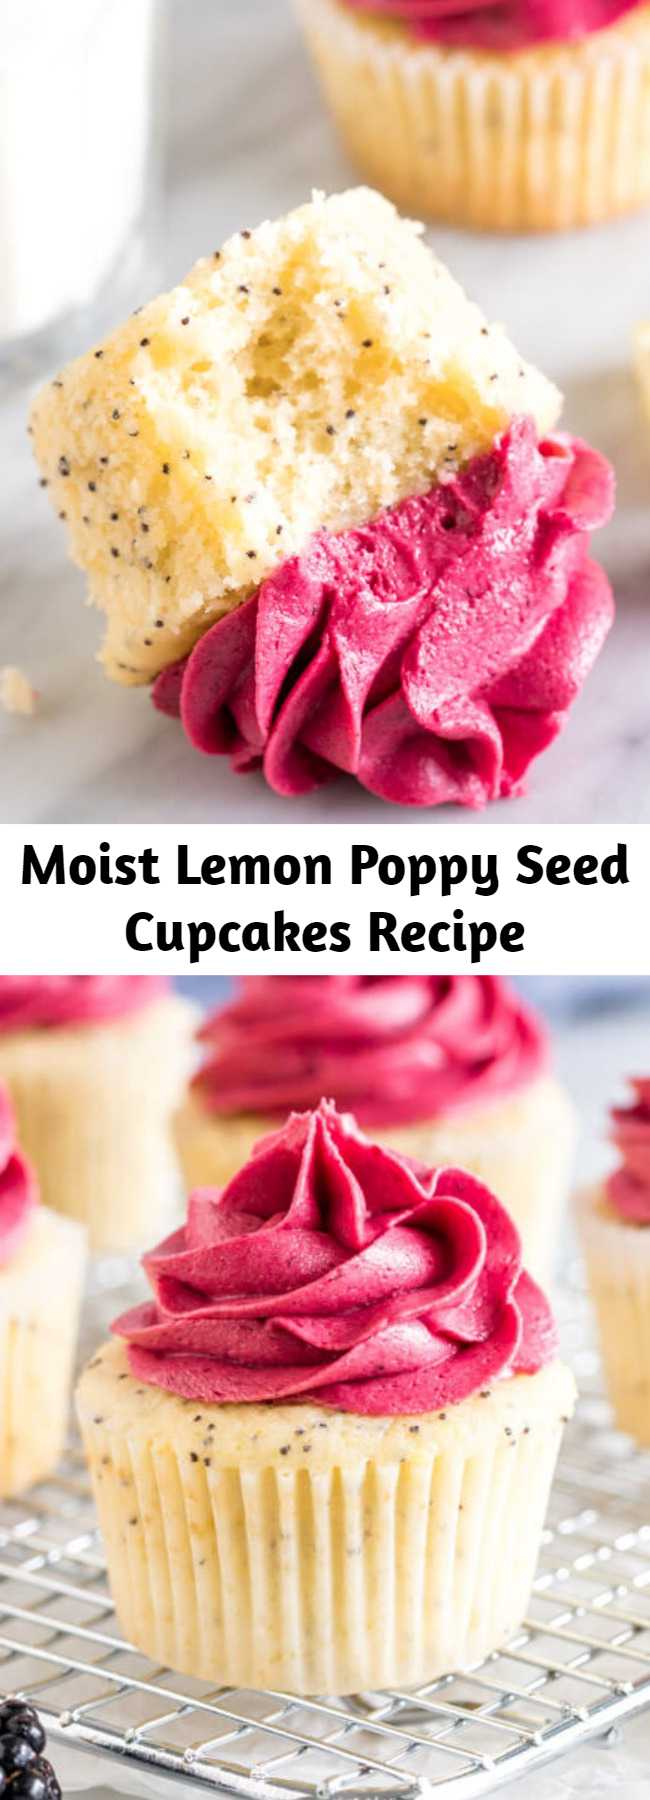 Moist Lemon Poppy Seed Cupcakes Recipe - Moist and tender, these lemon poppy seed cupcakes are bursting with a fresh lemon flavor and filled with tiny, crunchy poppy seeds. The blackberry frosting tastes like biting into fresh berries, and the beautiful color combination makes these absolutely stunning.